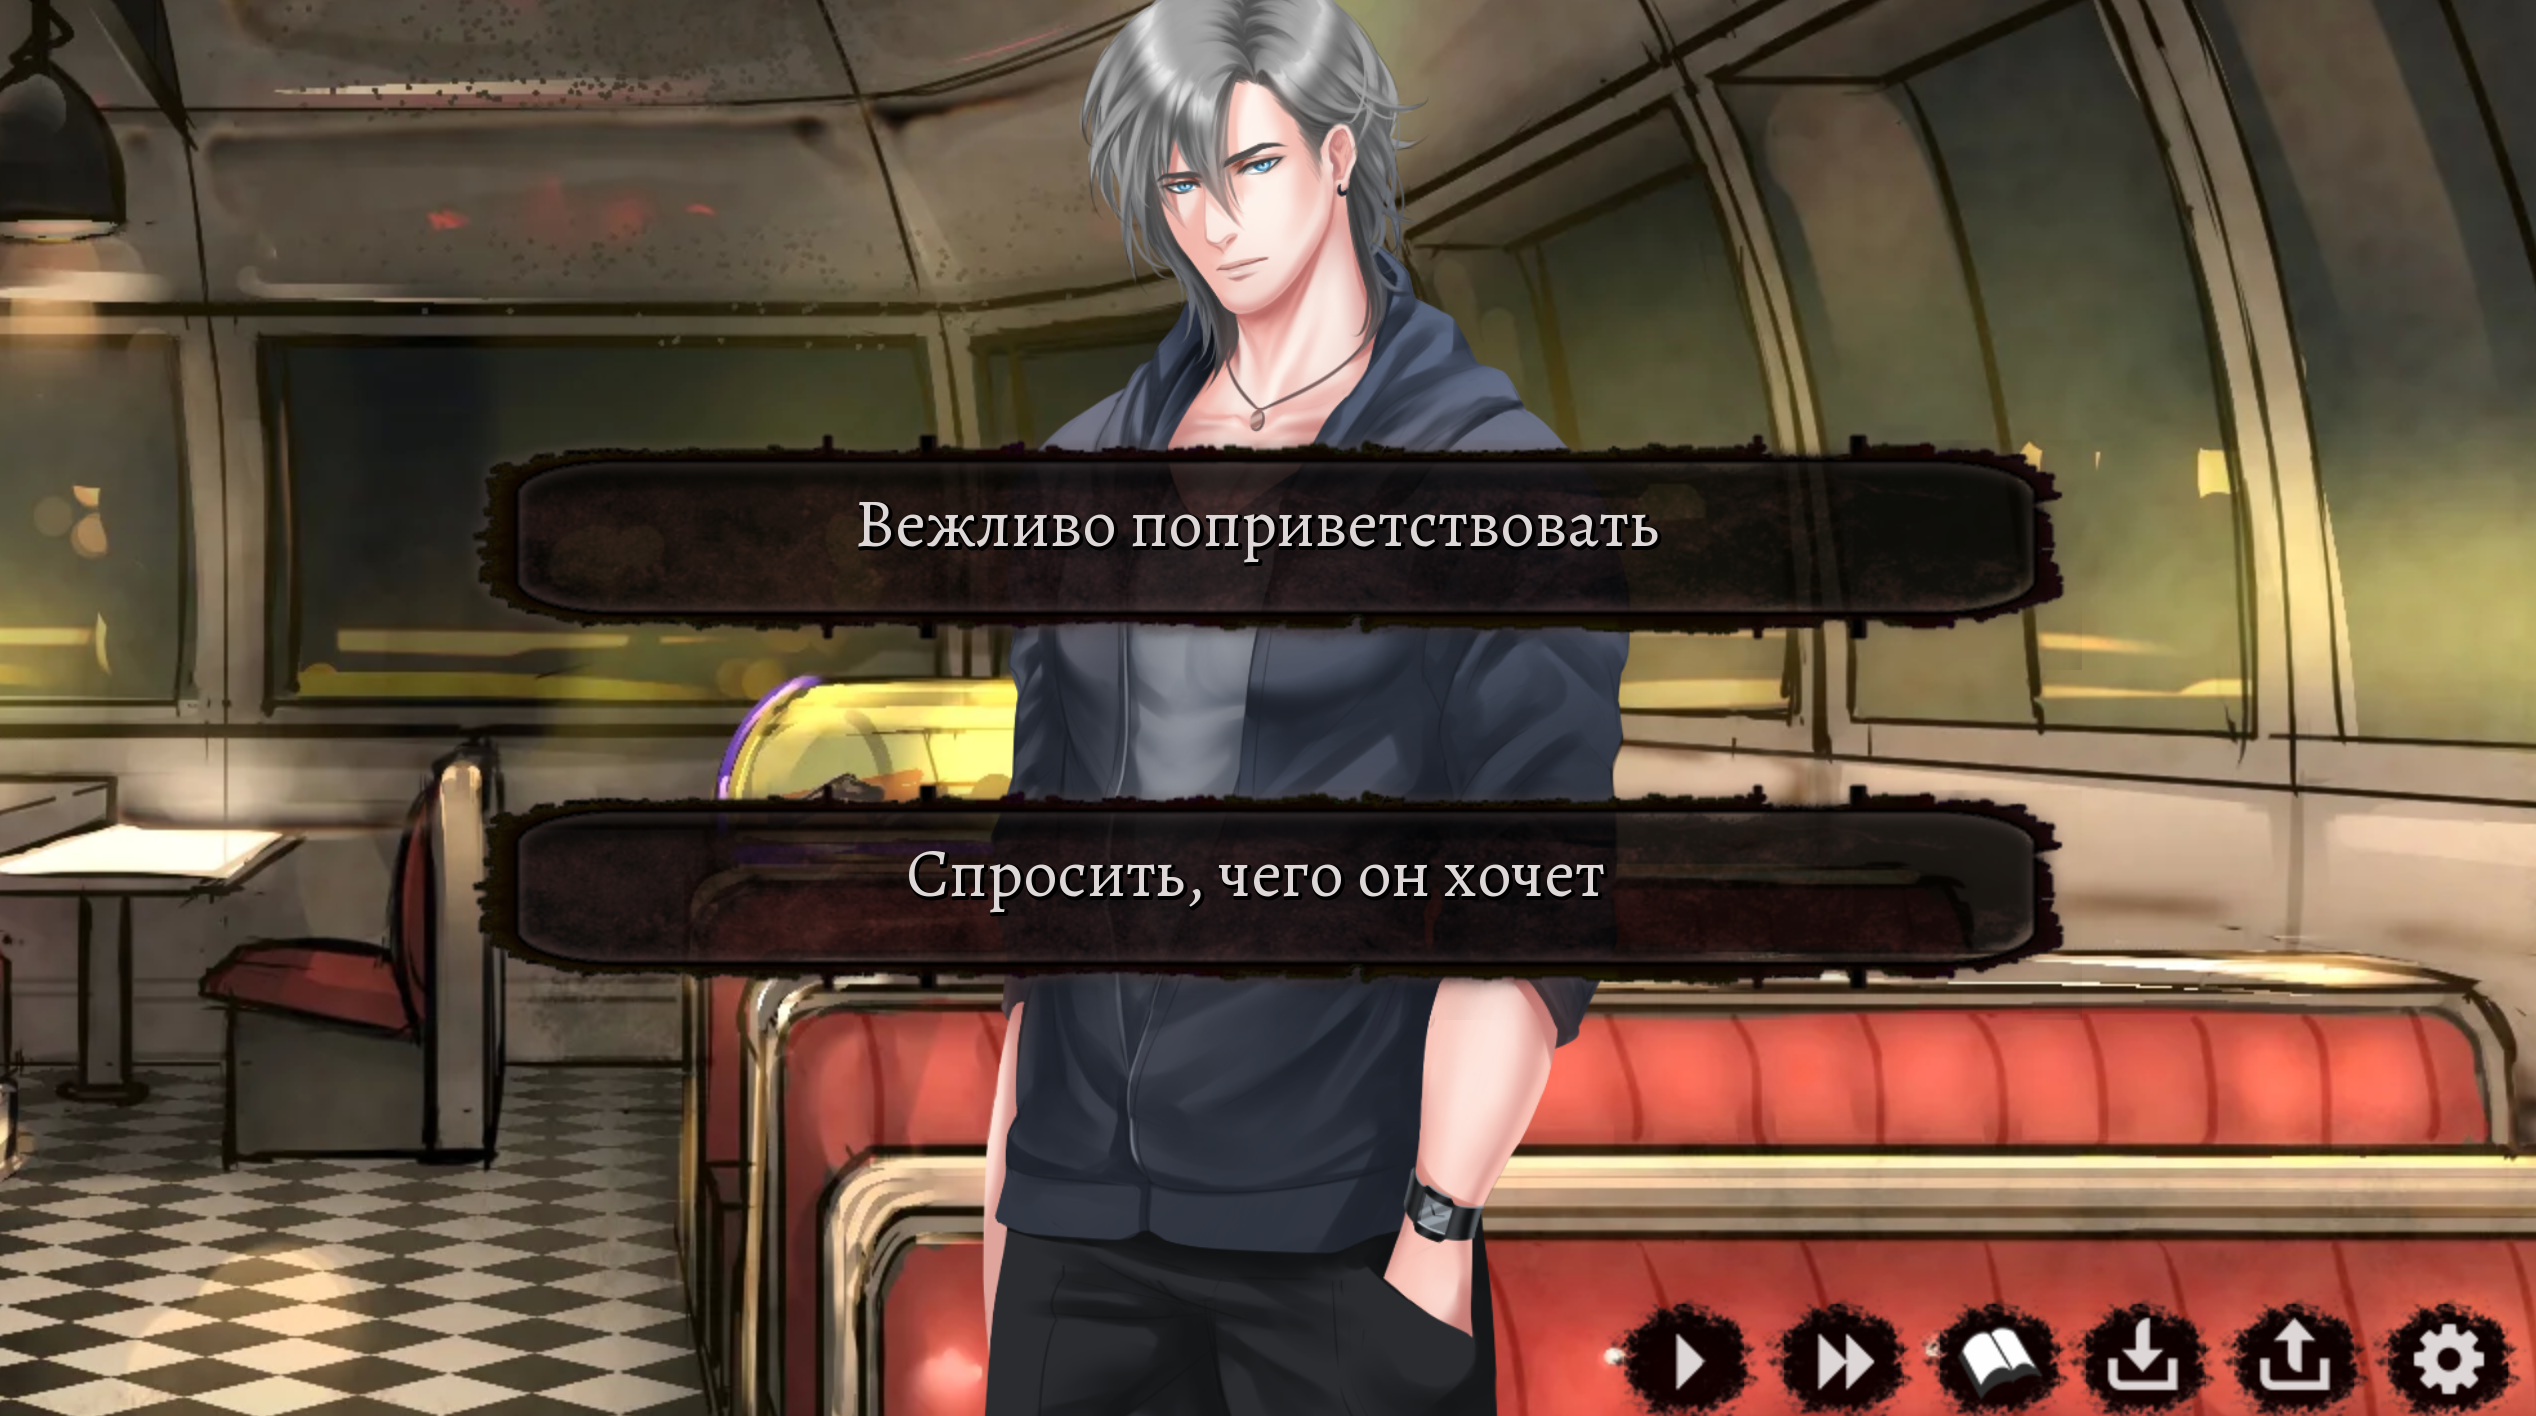 Choice menu in Russian with Dom